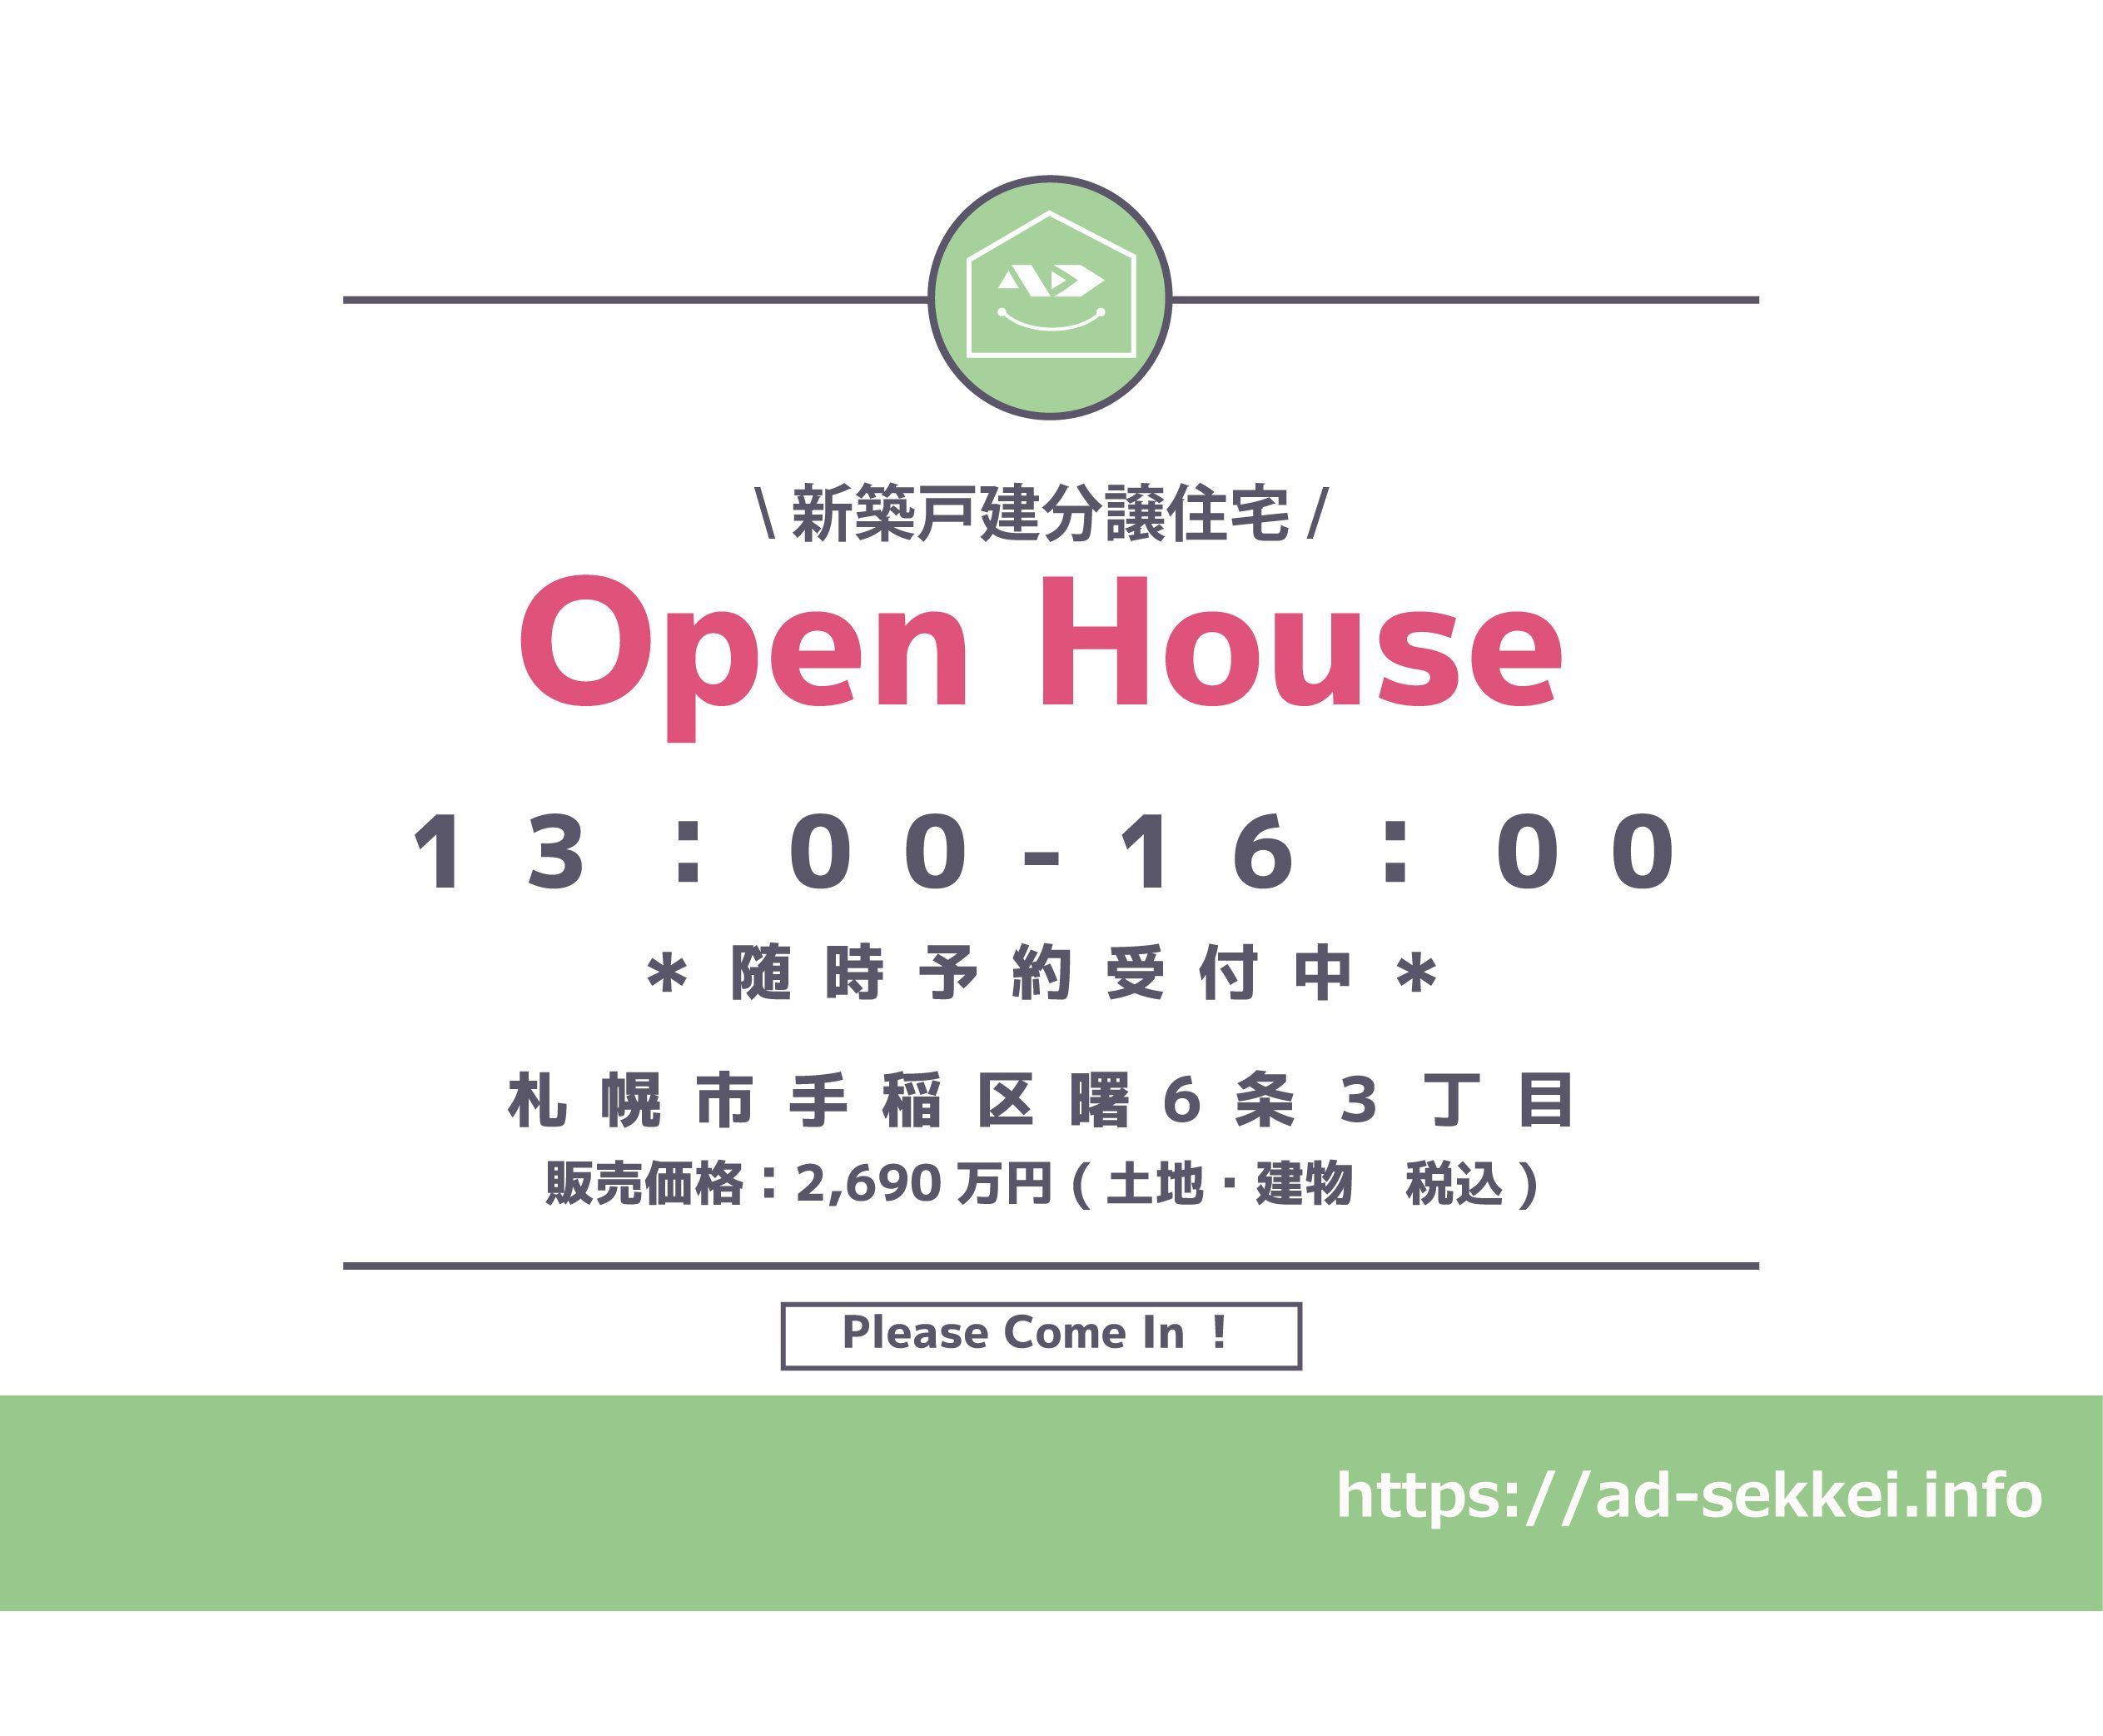 OPEN HOUSE
 at 
手稲区曙6条3丁目
